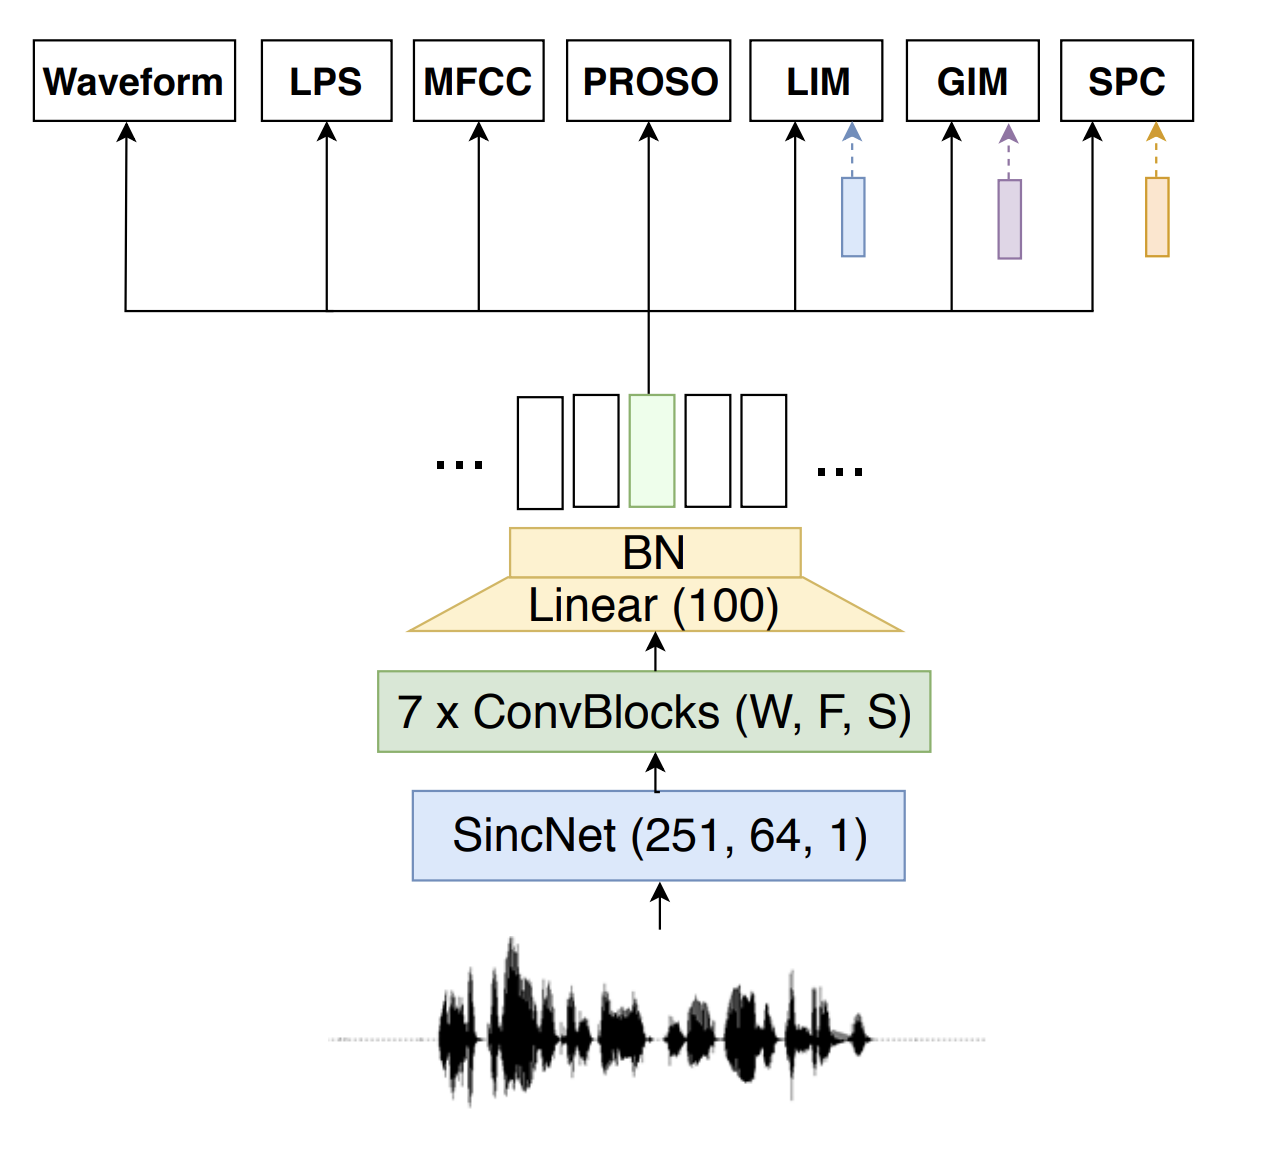 The PASE architecture (Image source: Learning Problem-agnostic Speech Representations from Multiple Self-supervised Tasks (2019))